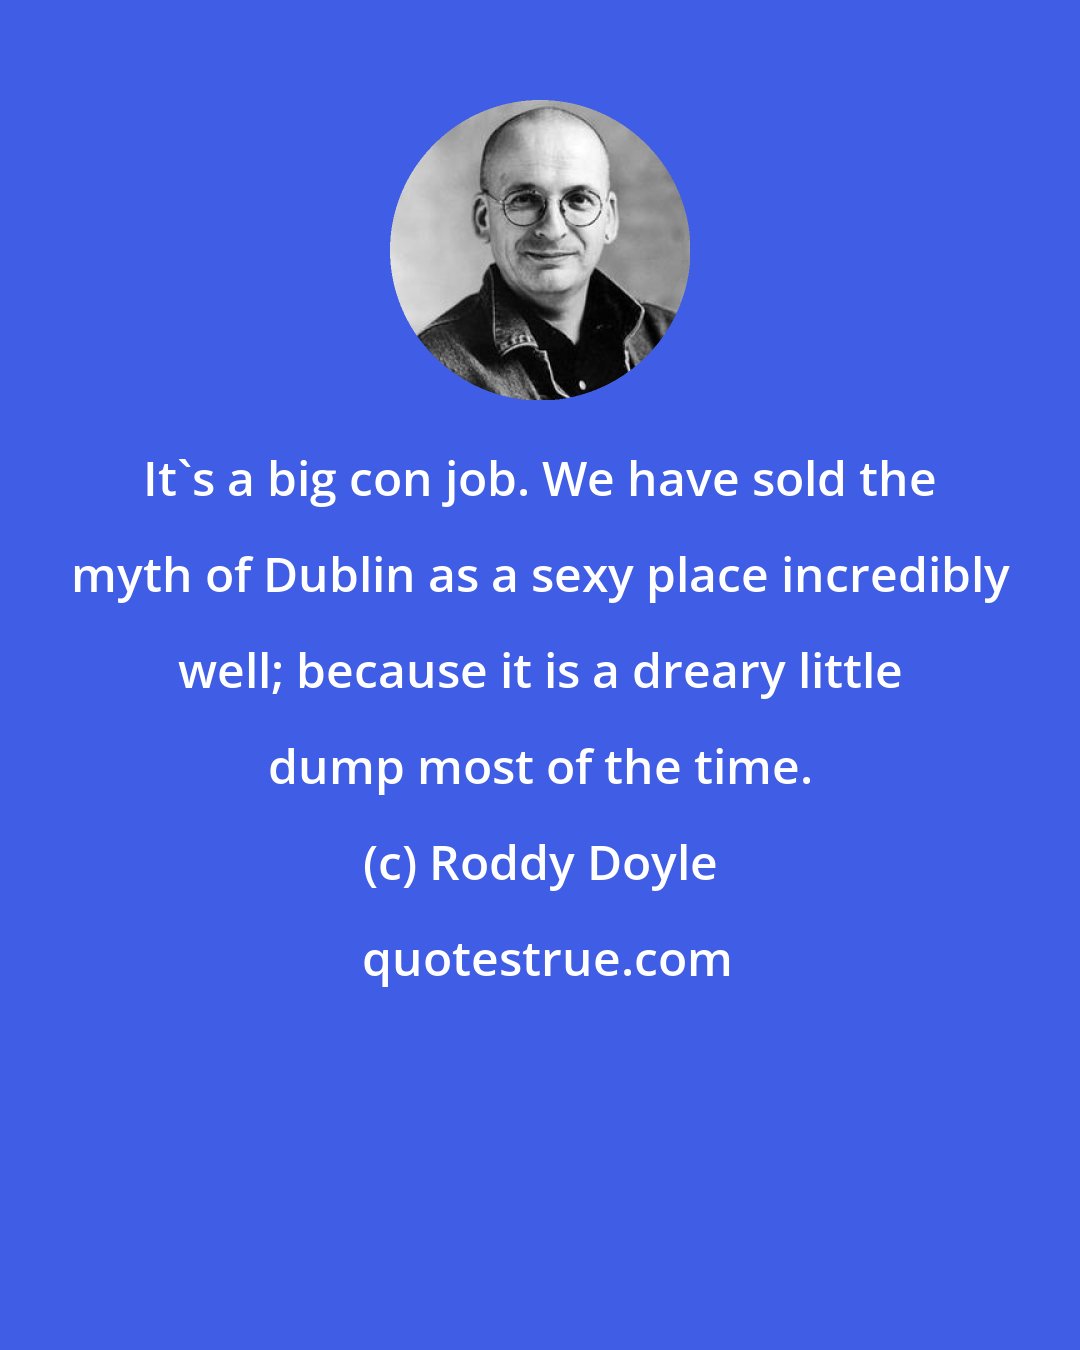 Roddy Doyle: It's a big con job. We have sold the myth of Dublin as a sexy place incredibly well; because it is a dreary little dump most of the time.